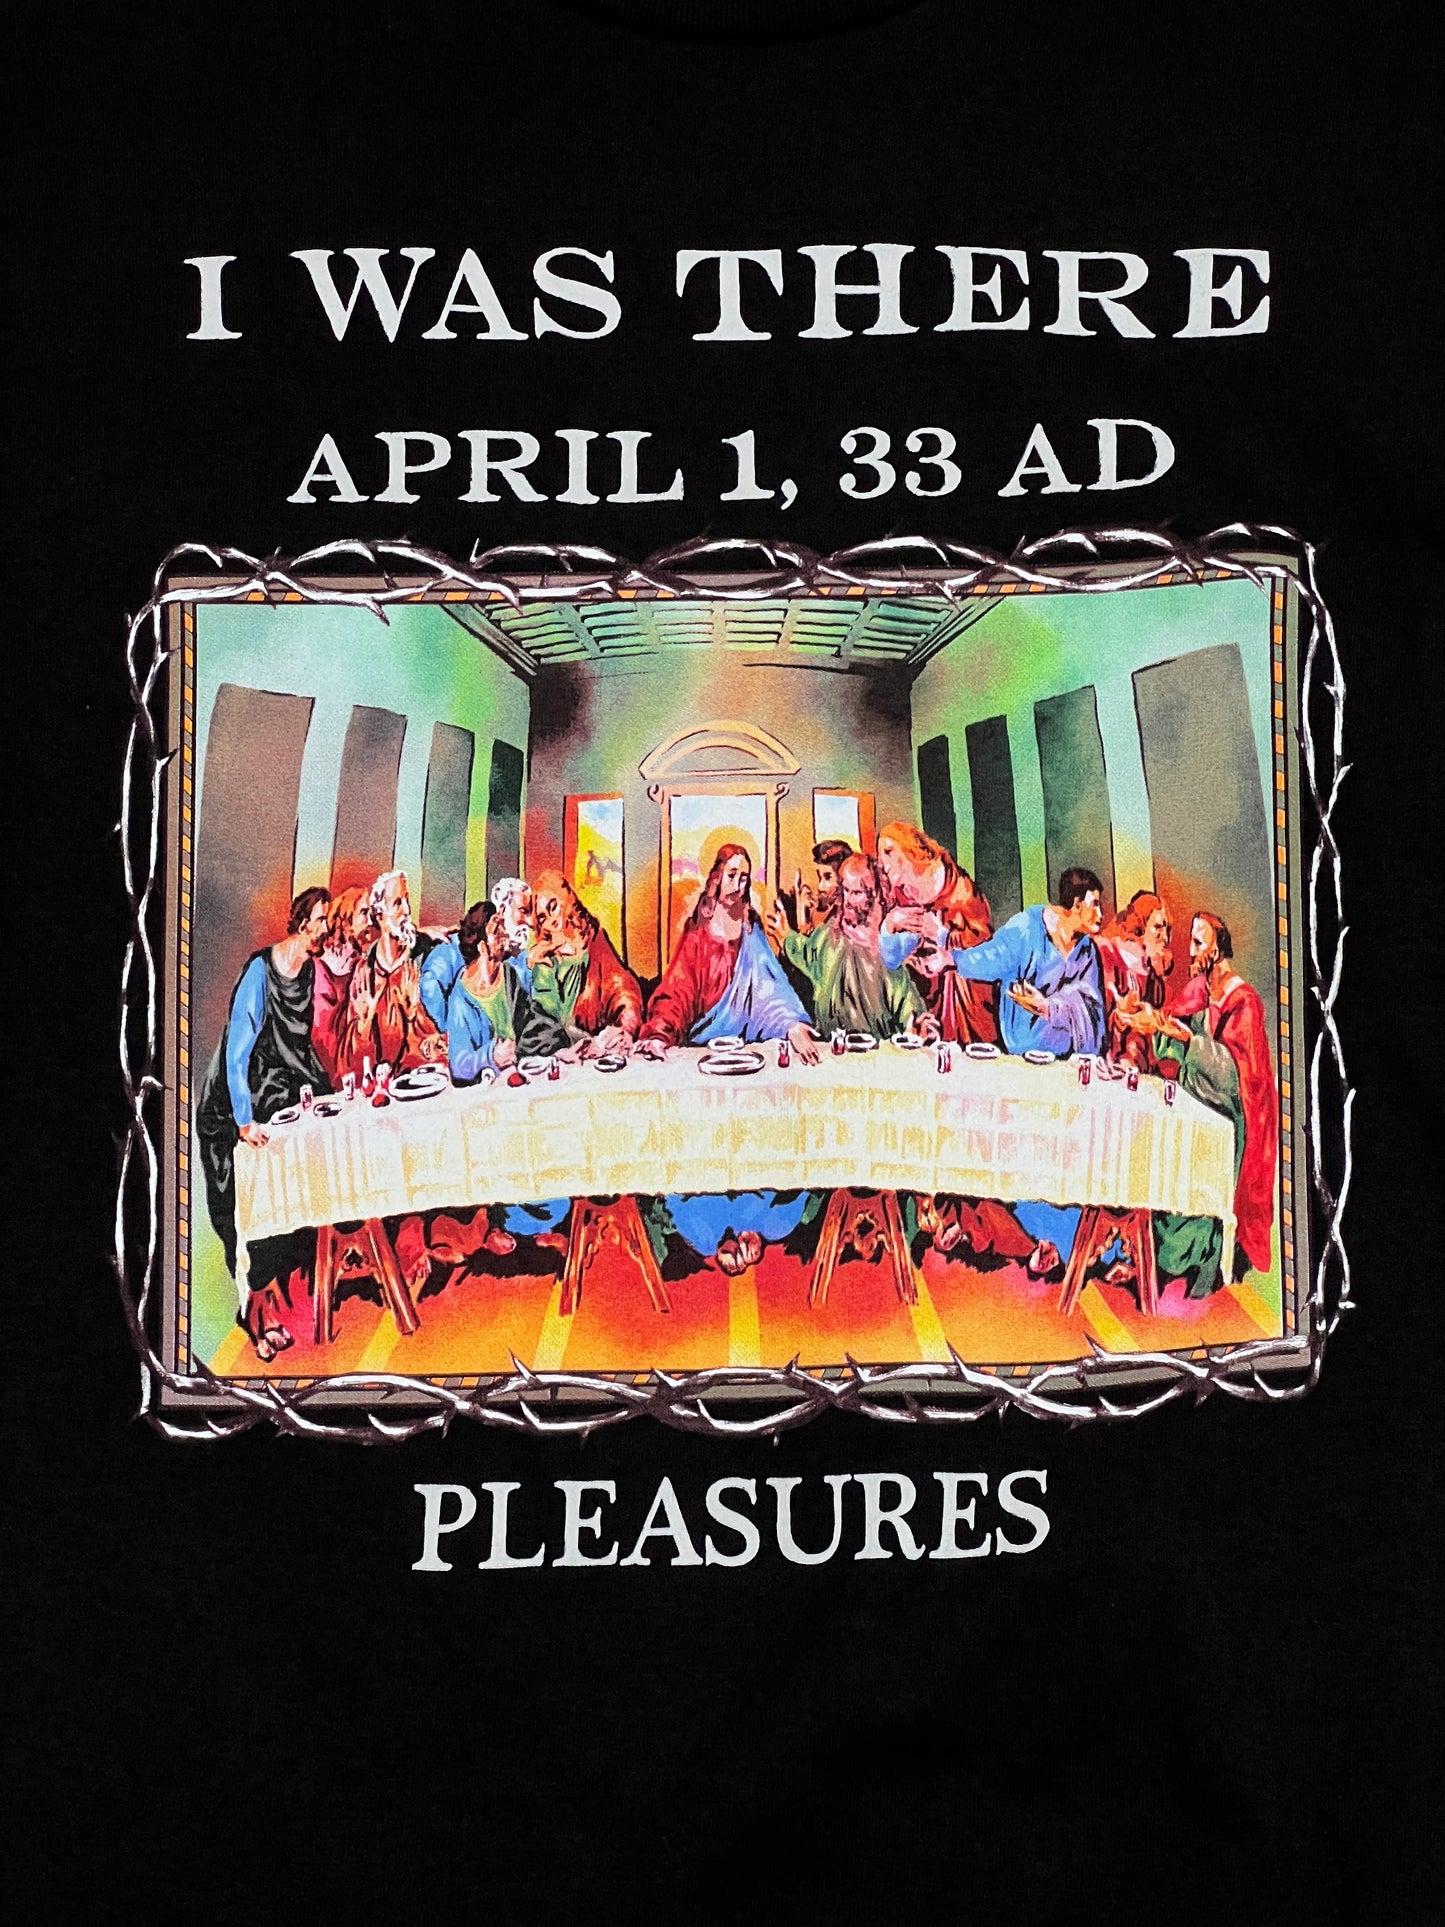 I was there April 13 wearing a PLEASURES SUPPER T-SHIRT BLACK/BLACK.